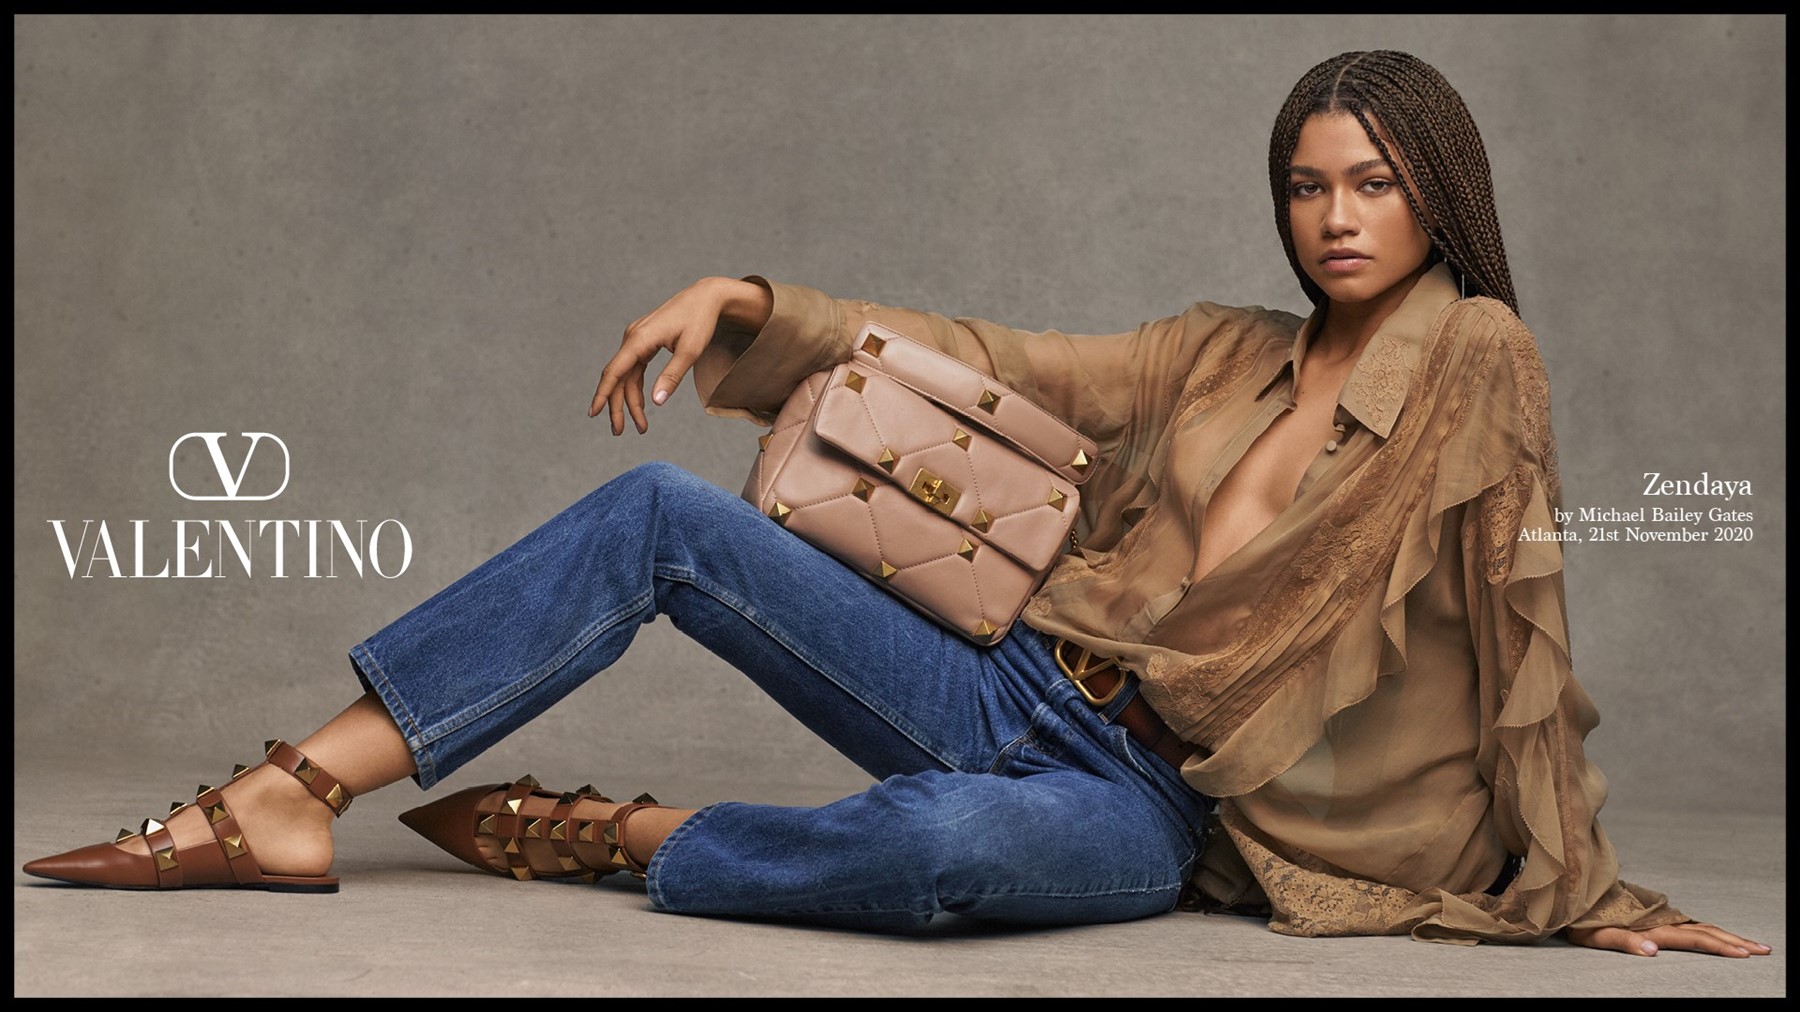 Zendaya is the star of Valentino's latest campaign